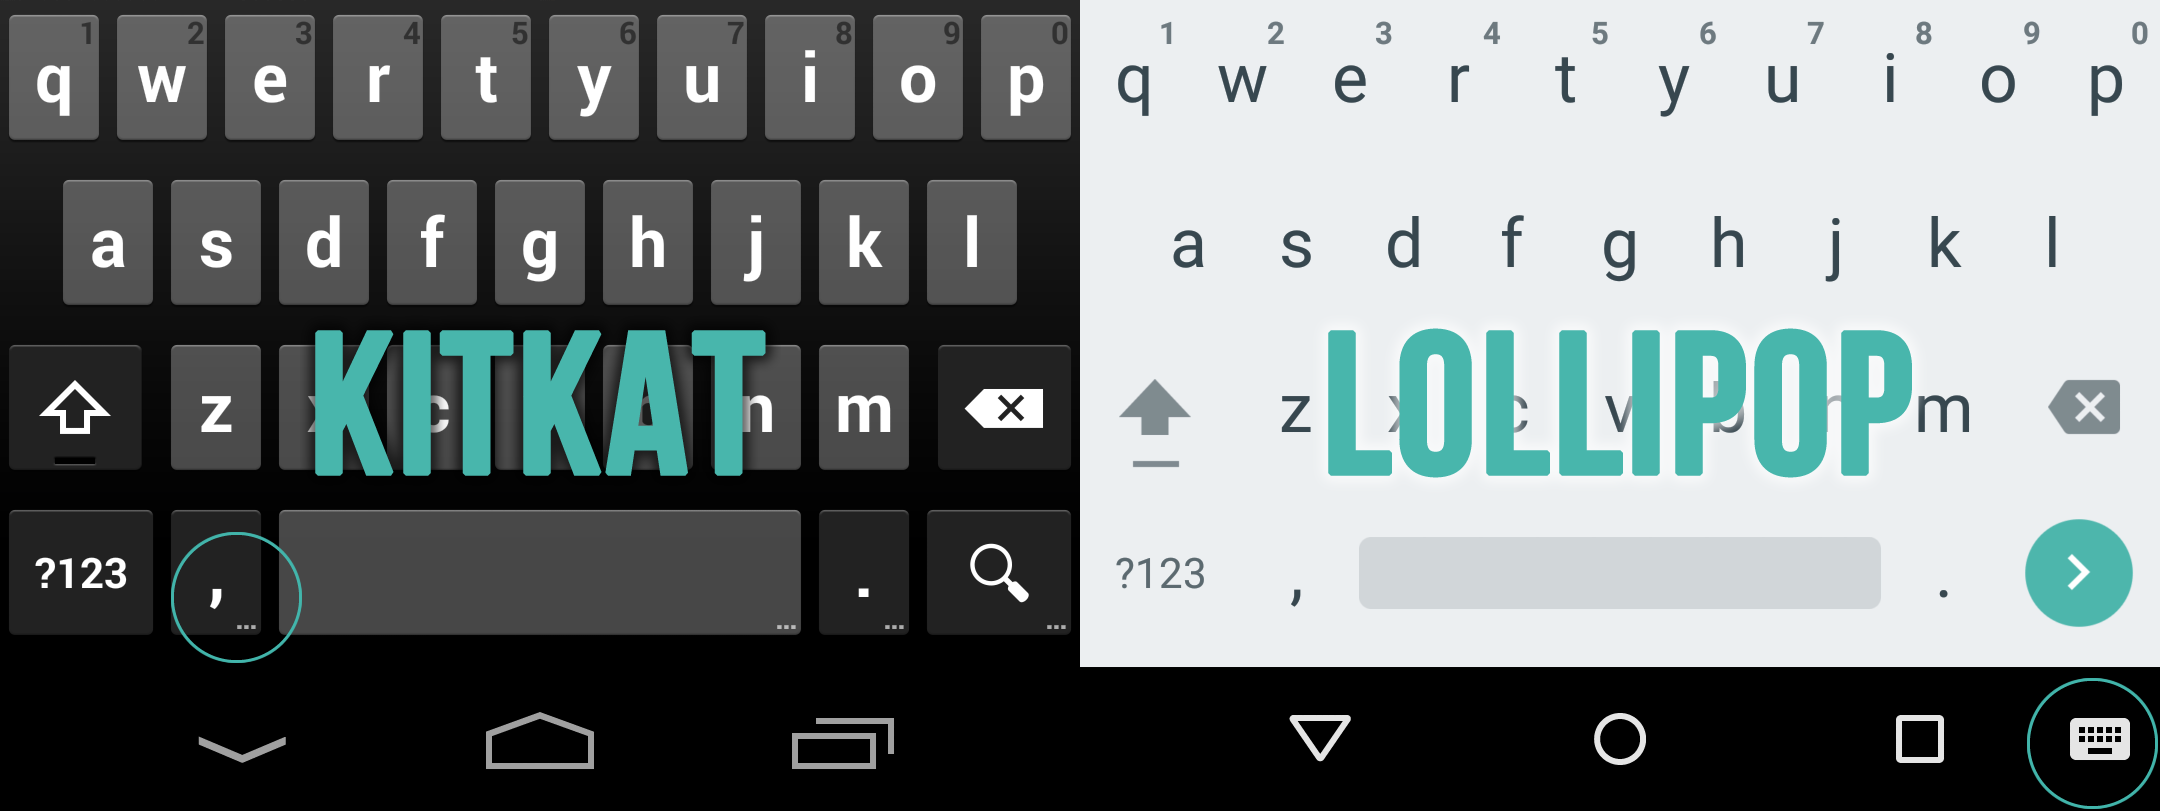 Android 5.0 - Keyboard Settings 3